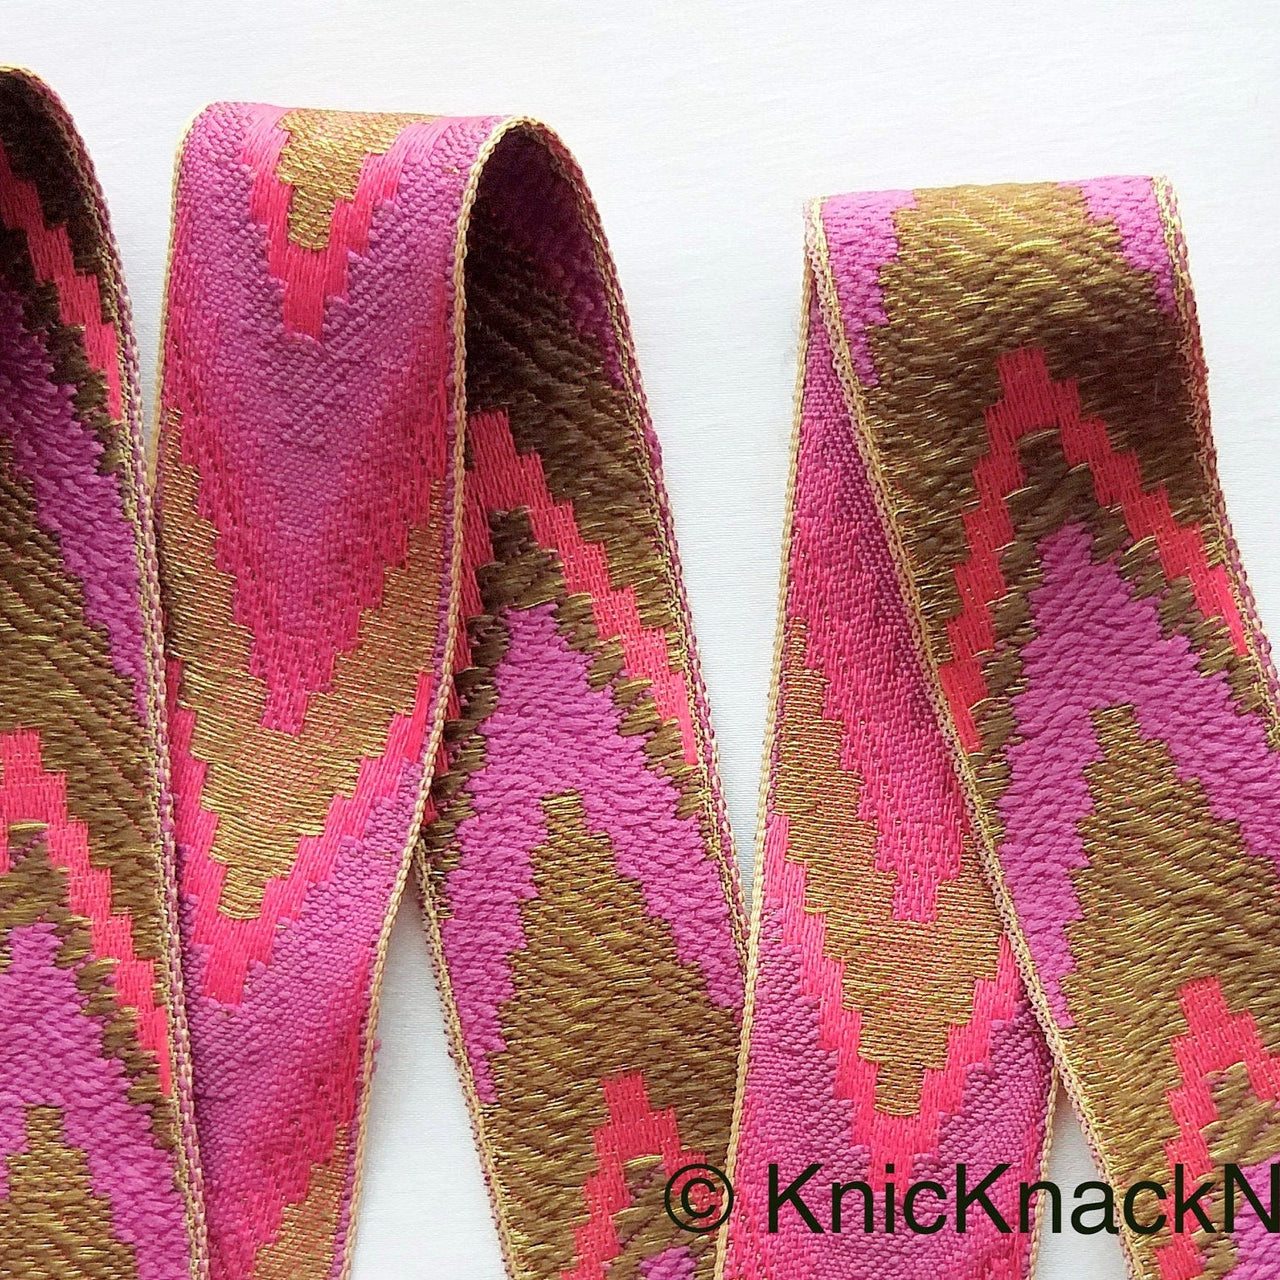 Purple / Green / Pink / Yellow / Beige, Pink And Antique Bronze Embroidered Lace Trim, Chevron Trim